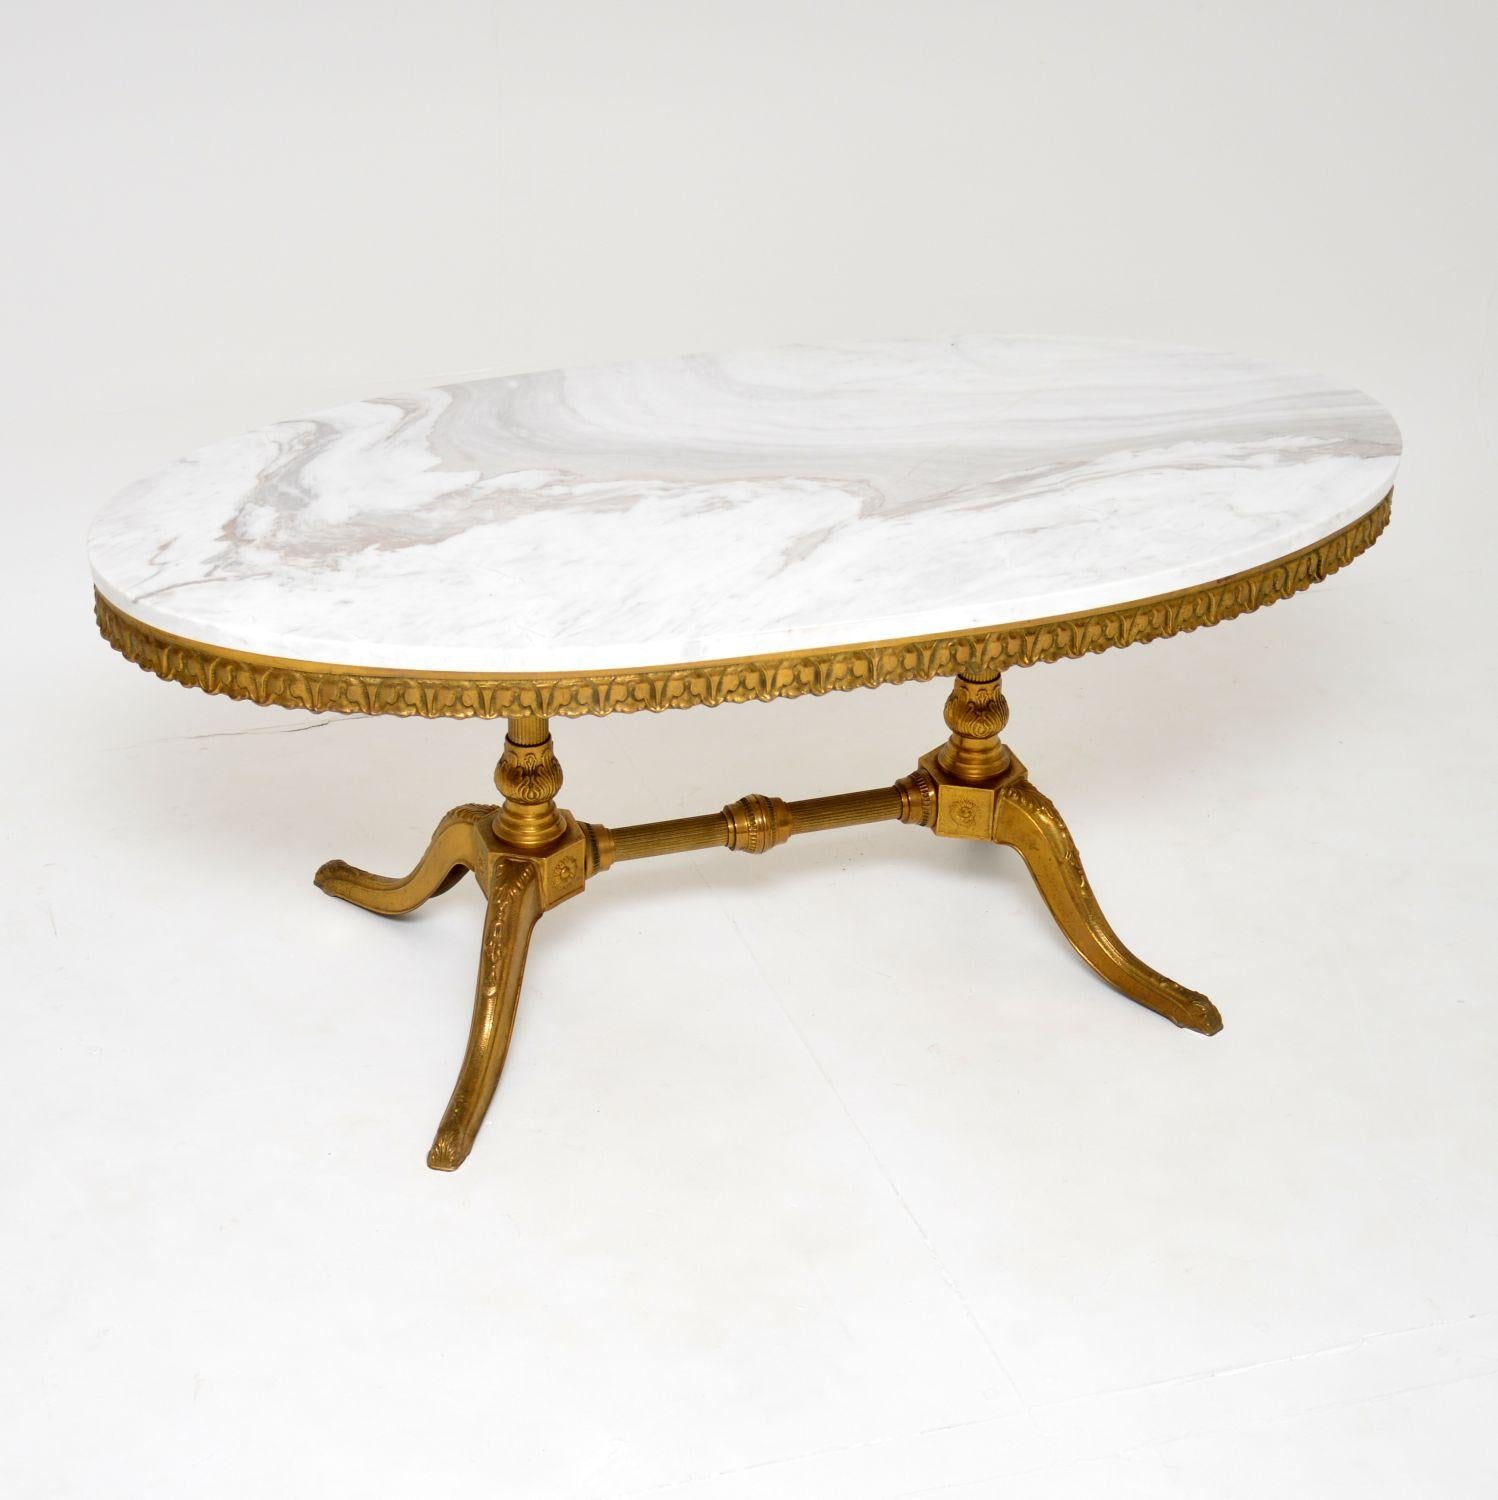 A beautiful antique coffee table in solid brass with a white marble top, dating from around the 1920-30’s.

The quality is excellent, the brass frame is beautifully detailed and is a very useful size. The white marble top has been newly made for